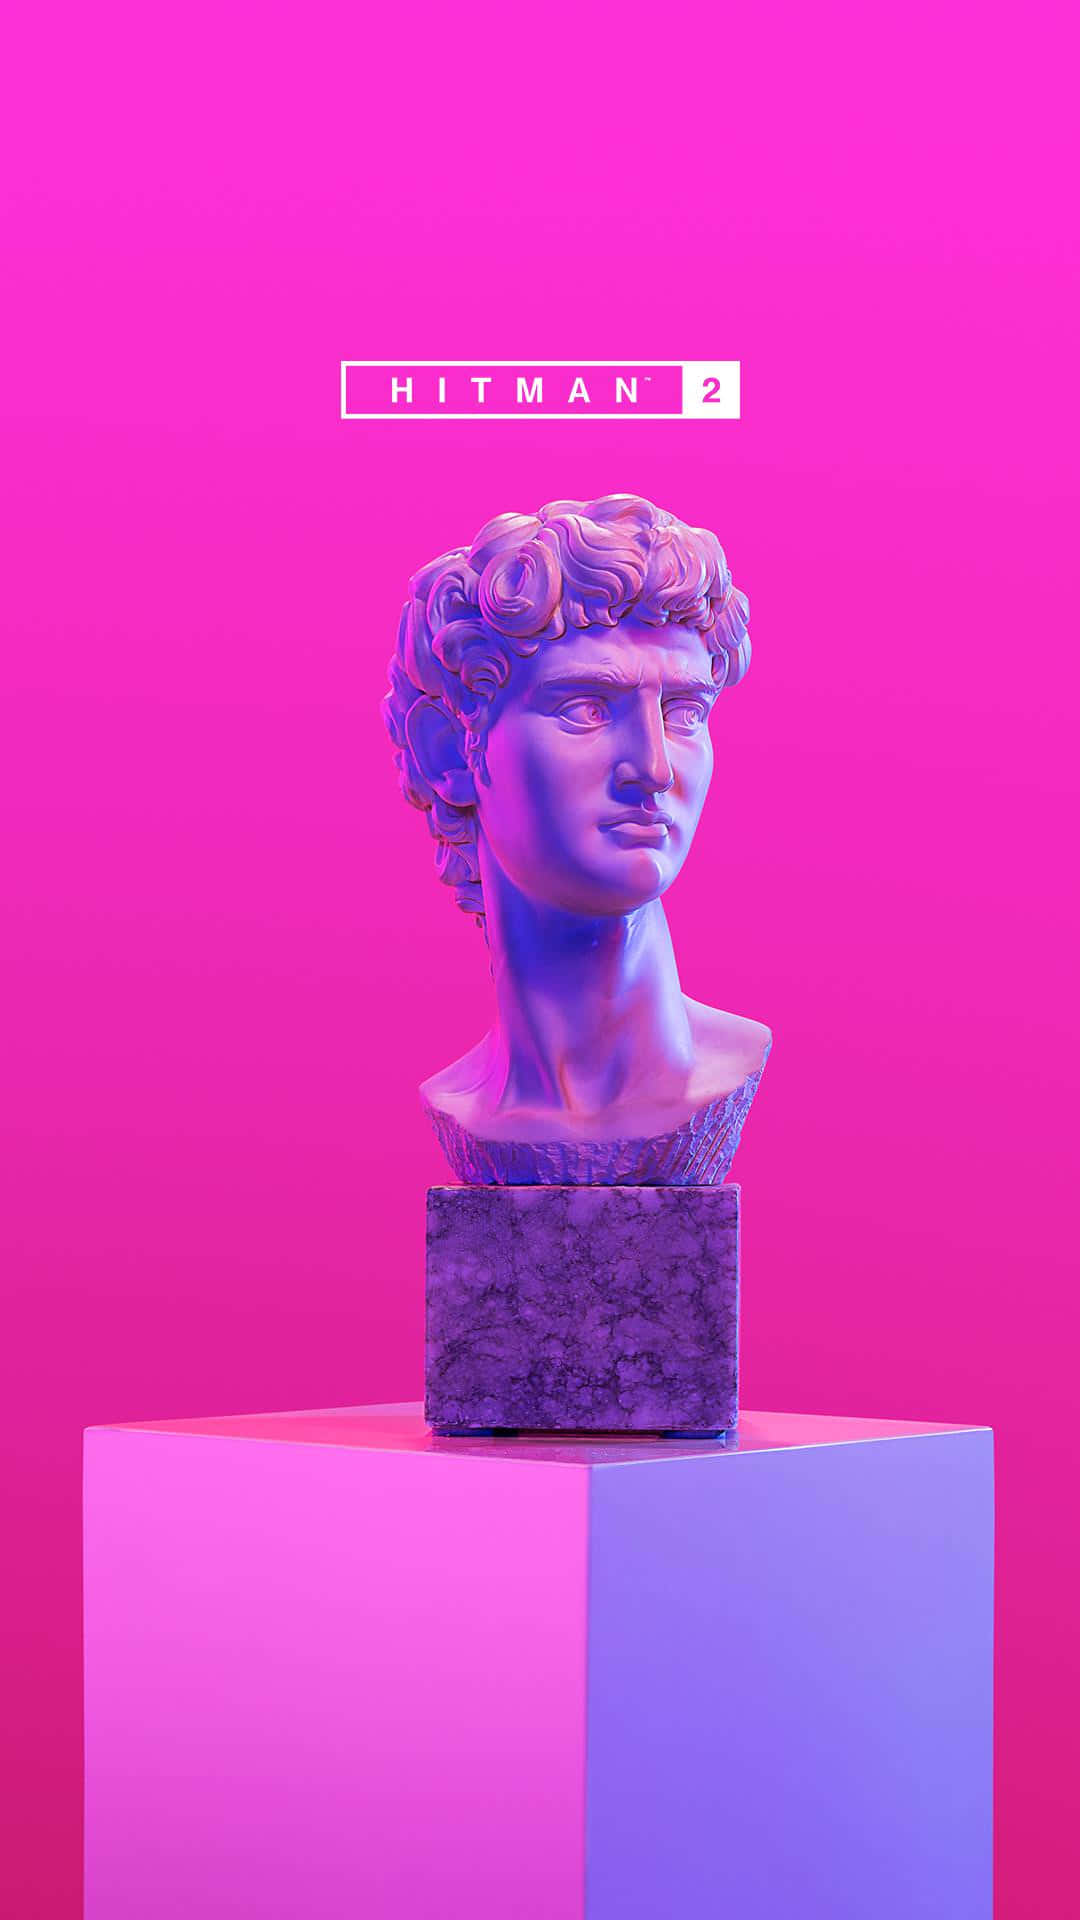 A Bust Of A Man With A Pink Background